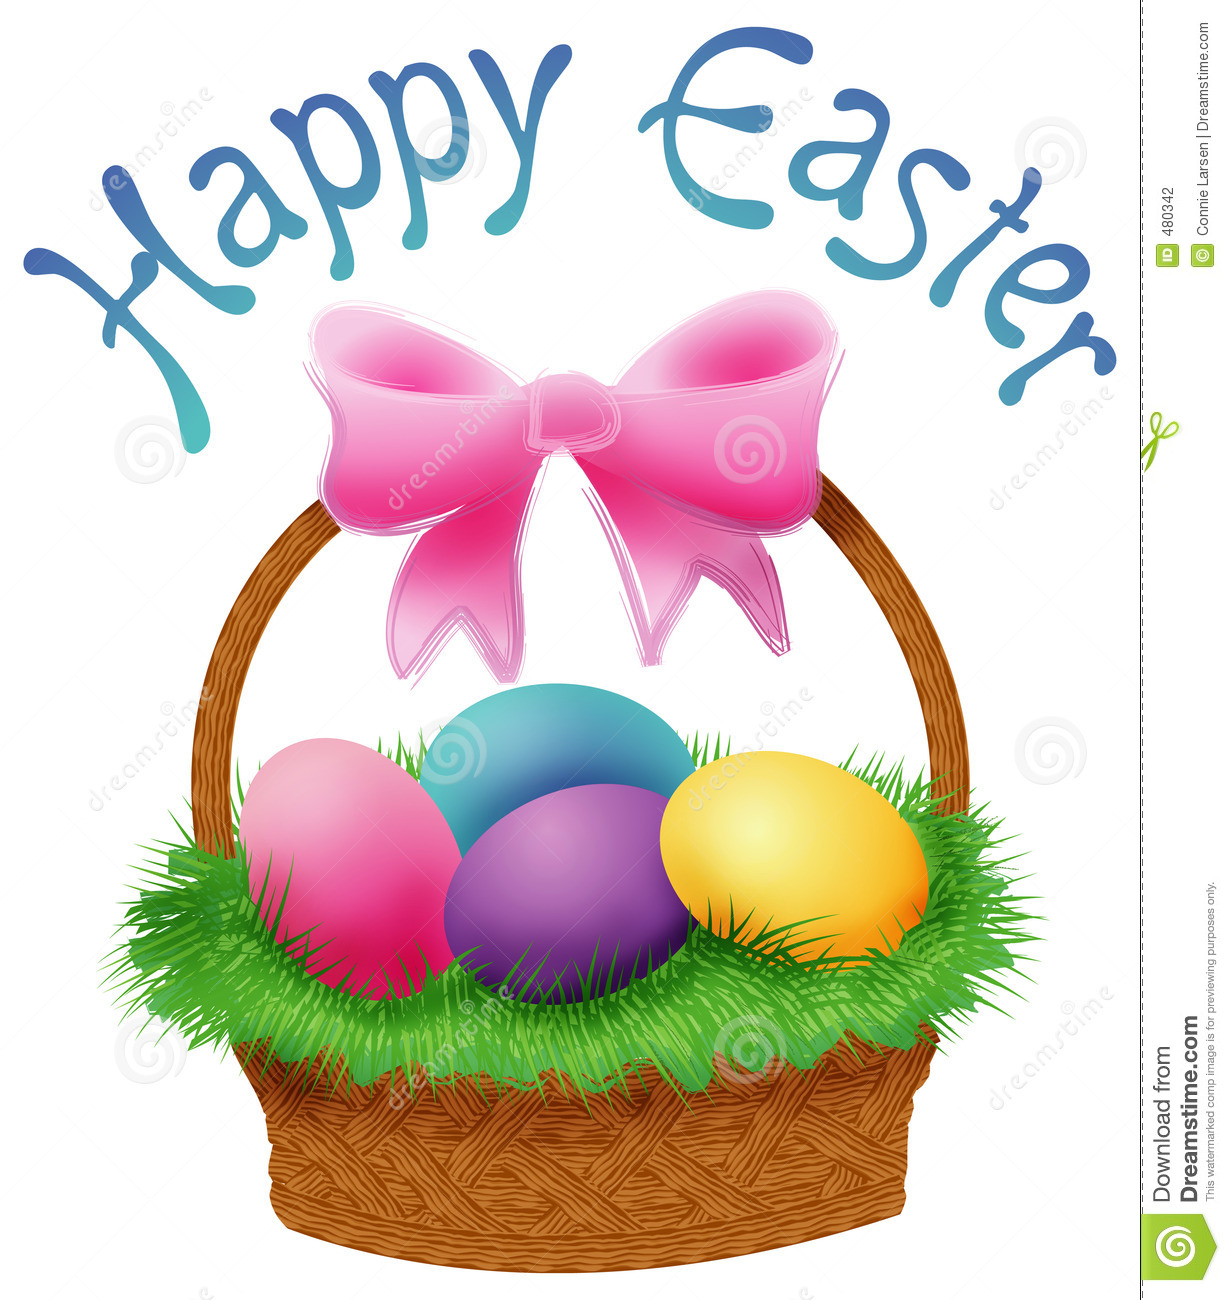 Free Happy Easter Clipart.